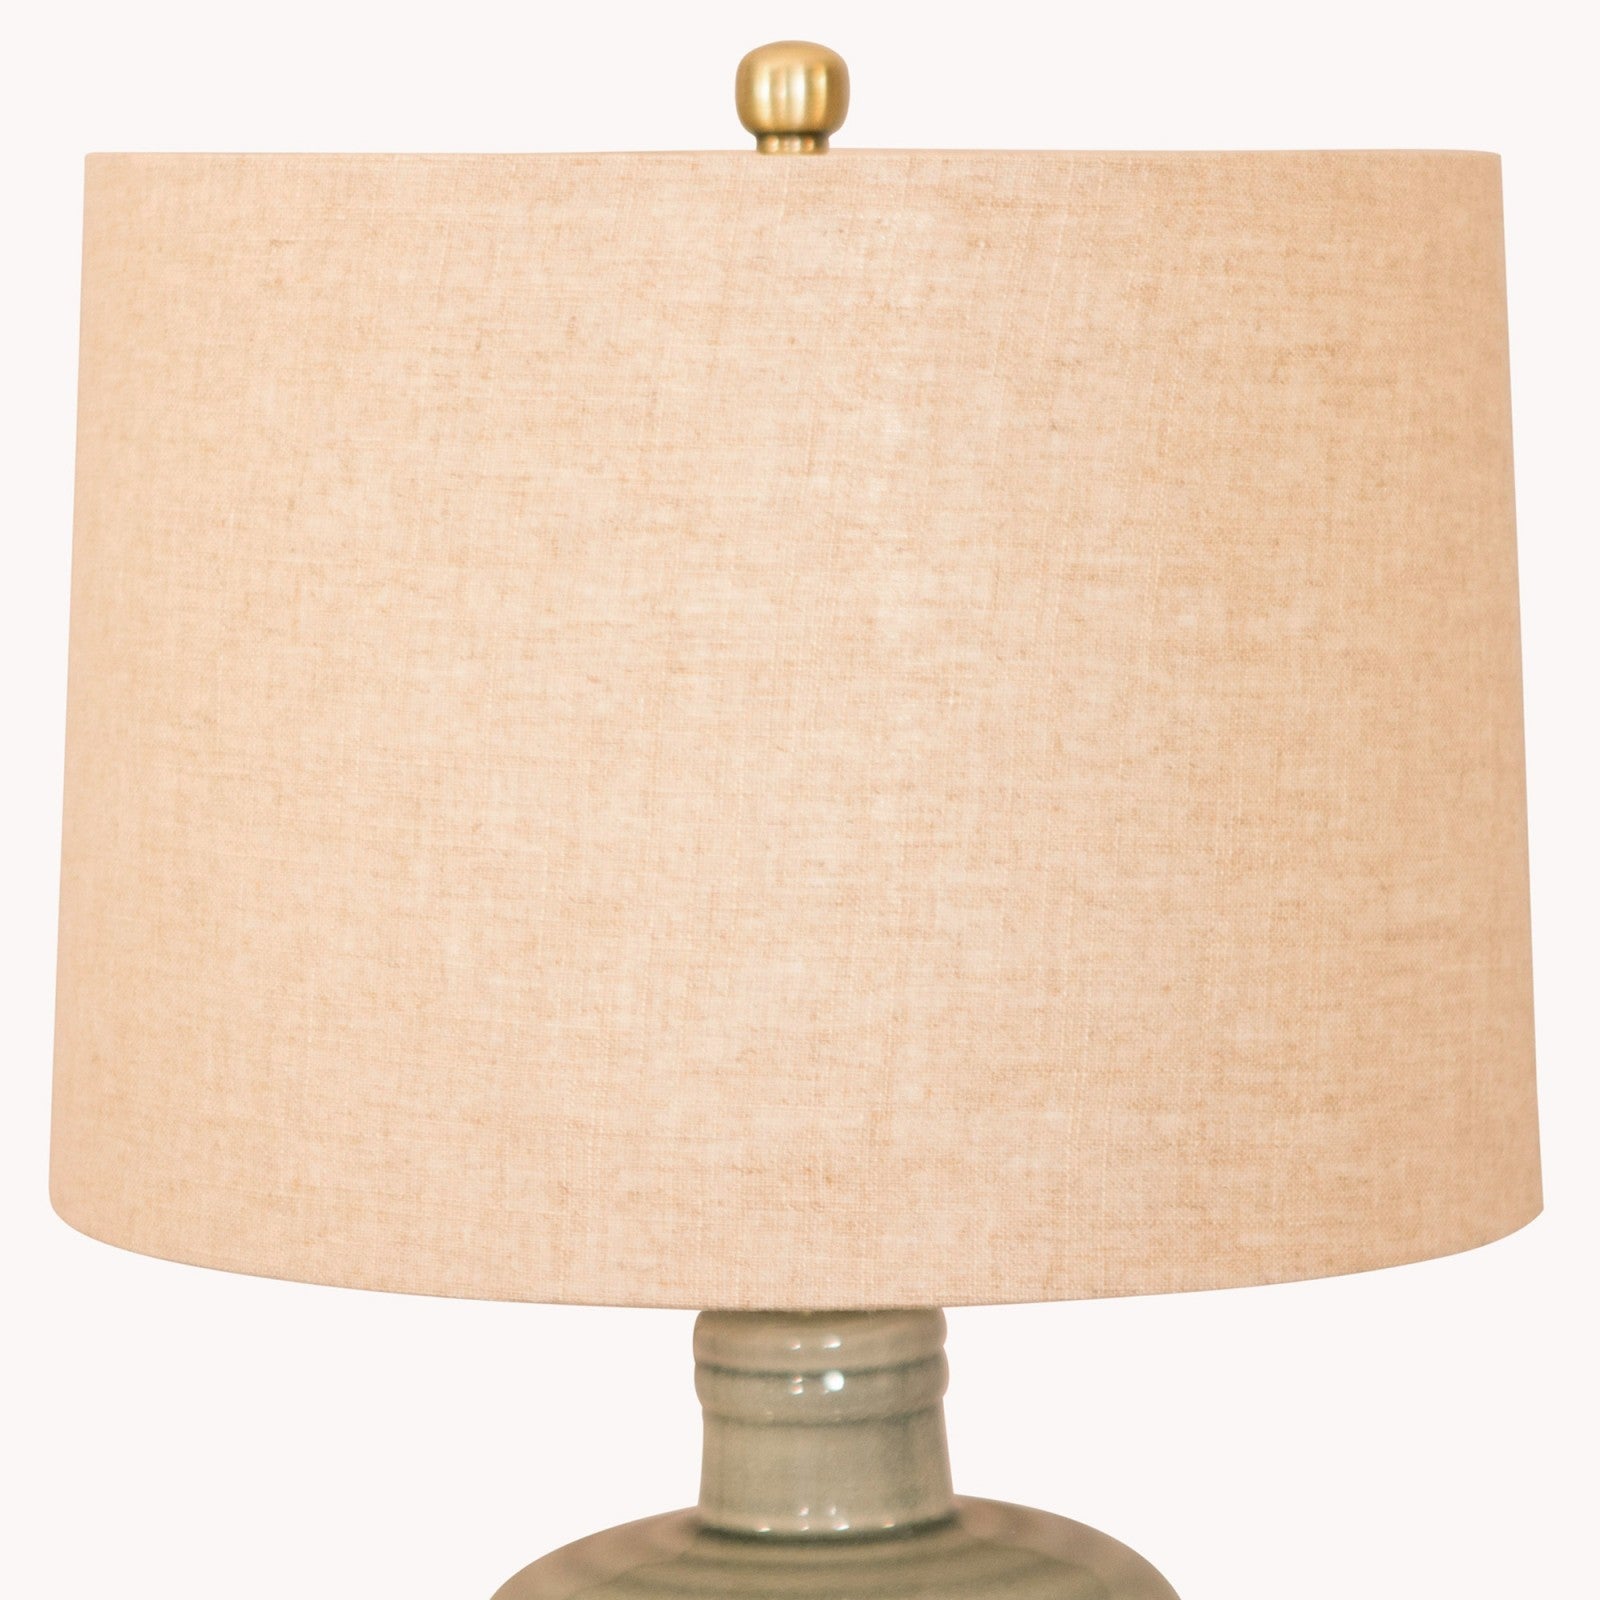 Clifton Glazed Ceramic Table Lamp with Natural Linen Shade - Duck Barn Interiors